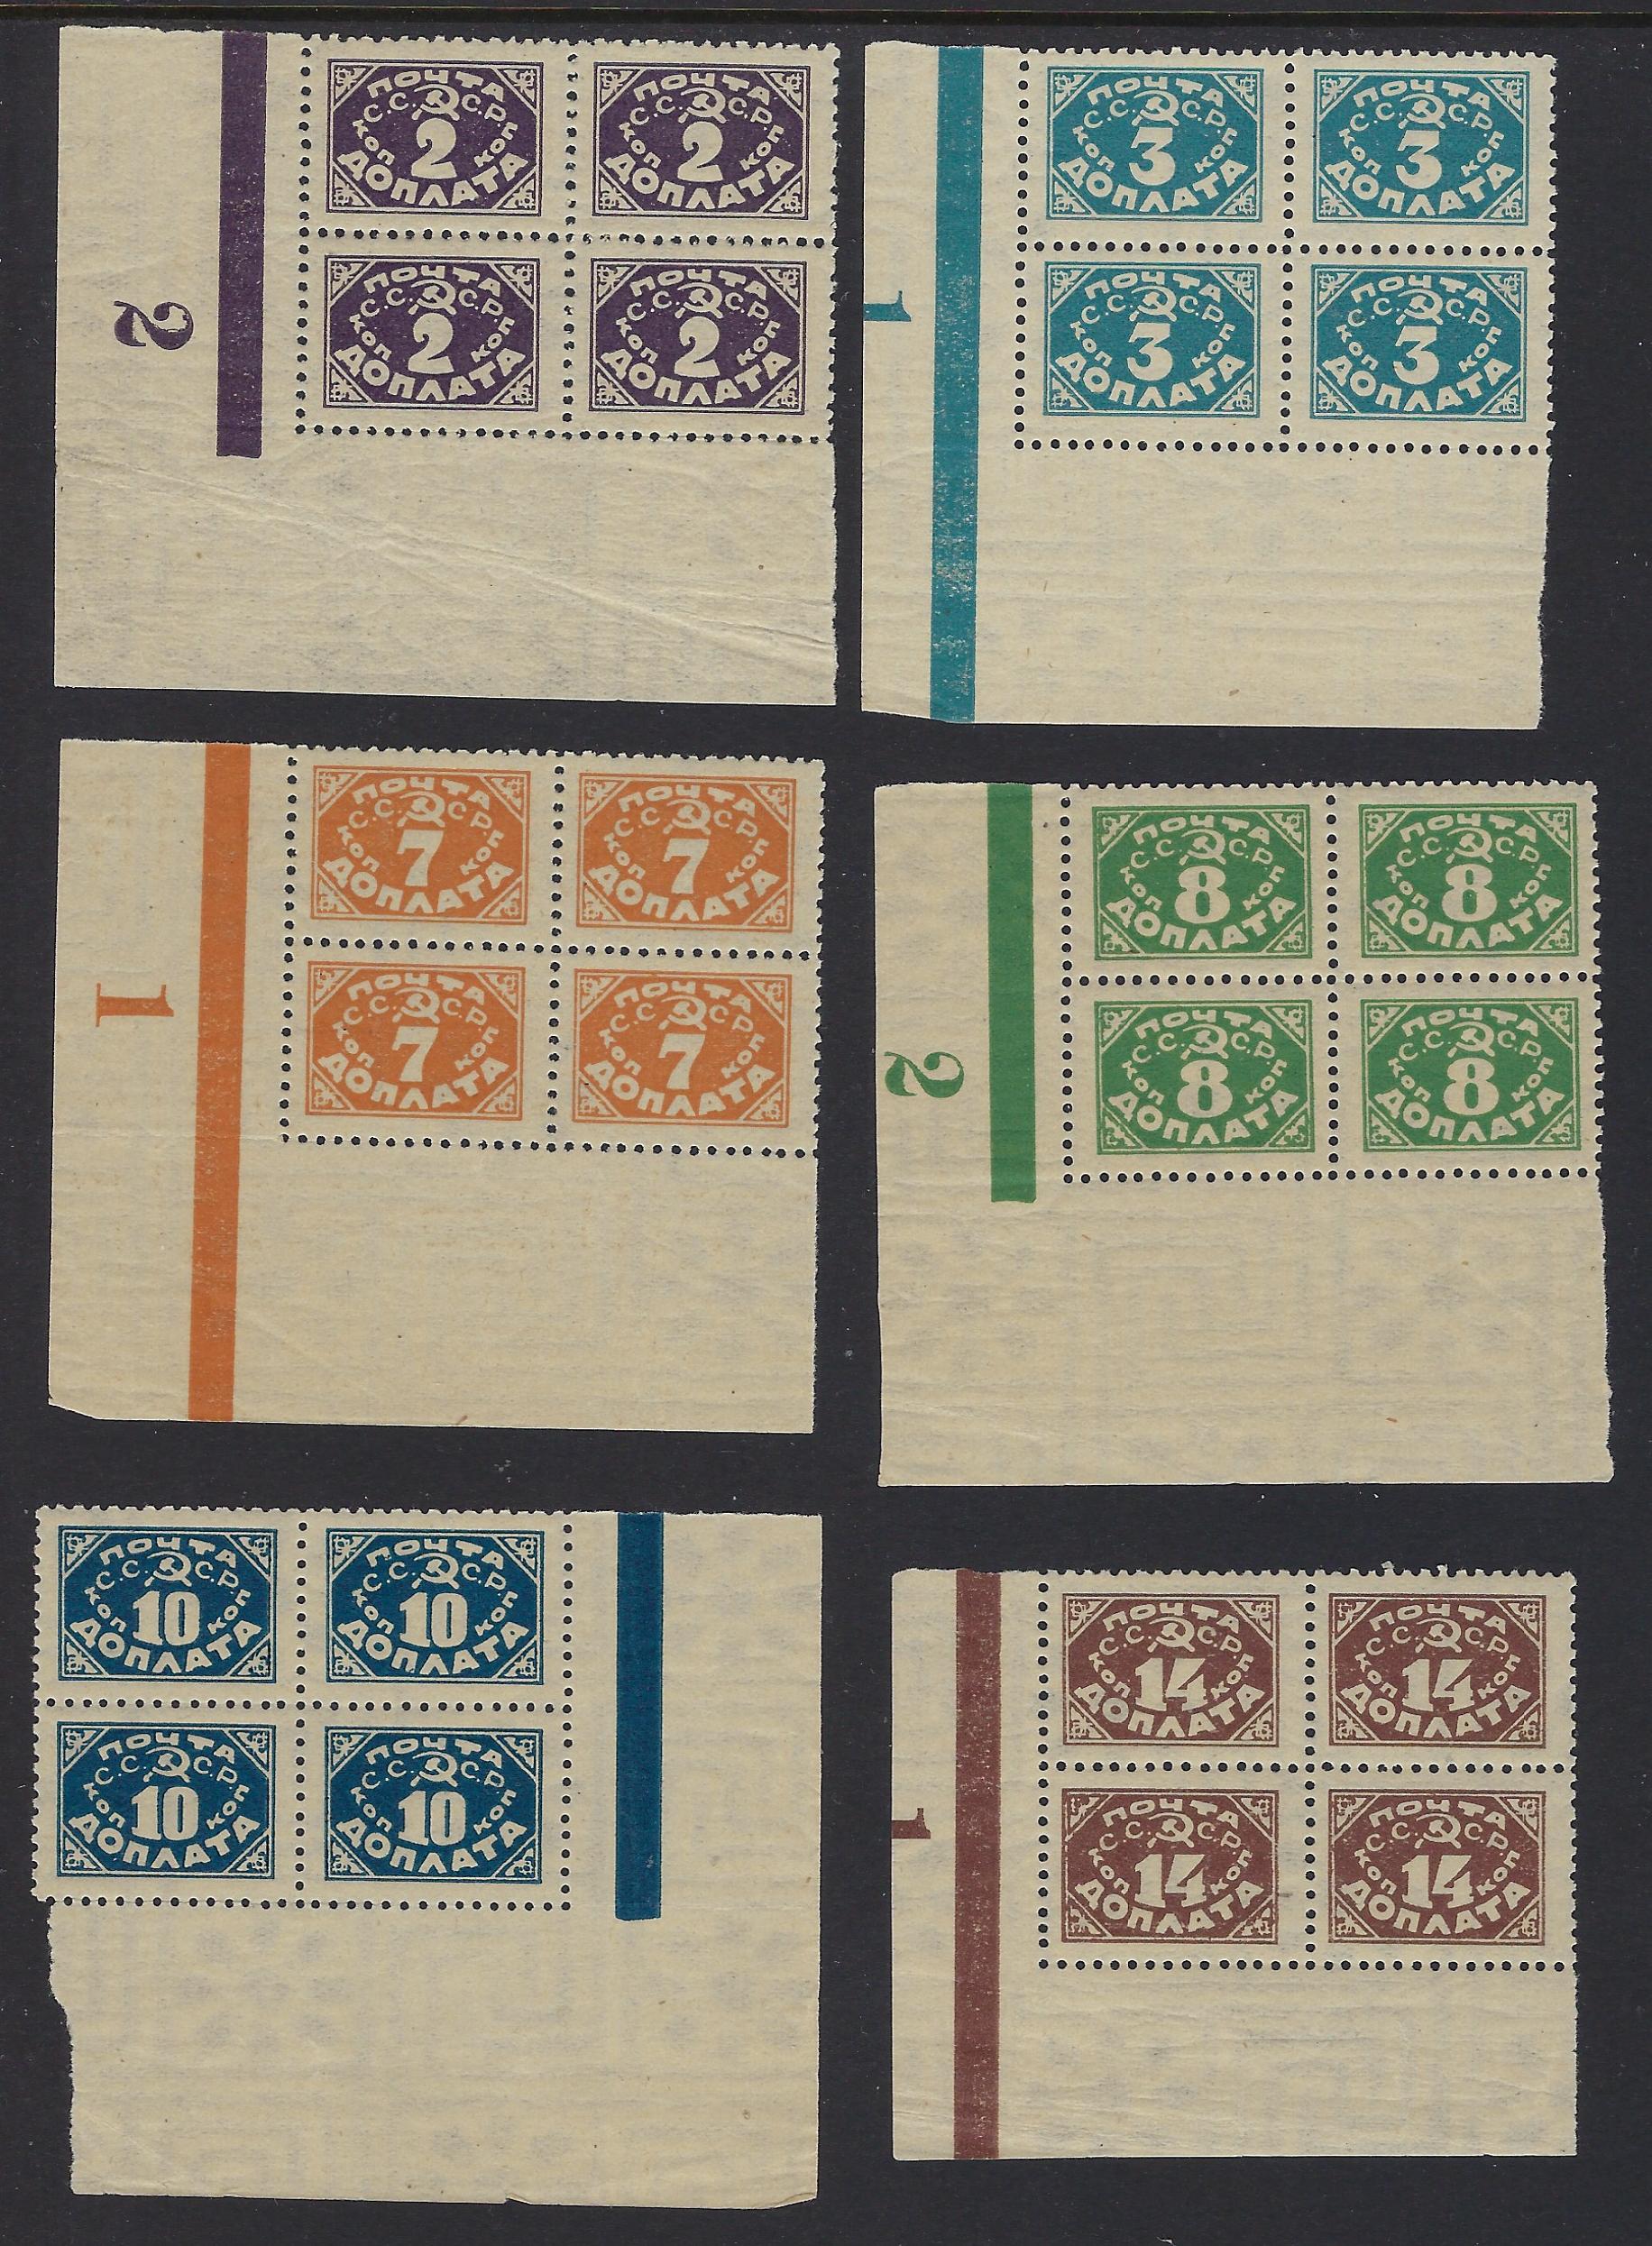 PRussia Specialized - ostage Dues Postage Dues Scott J19-24 